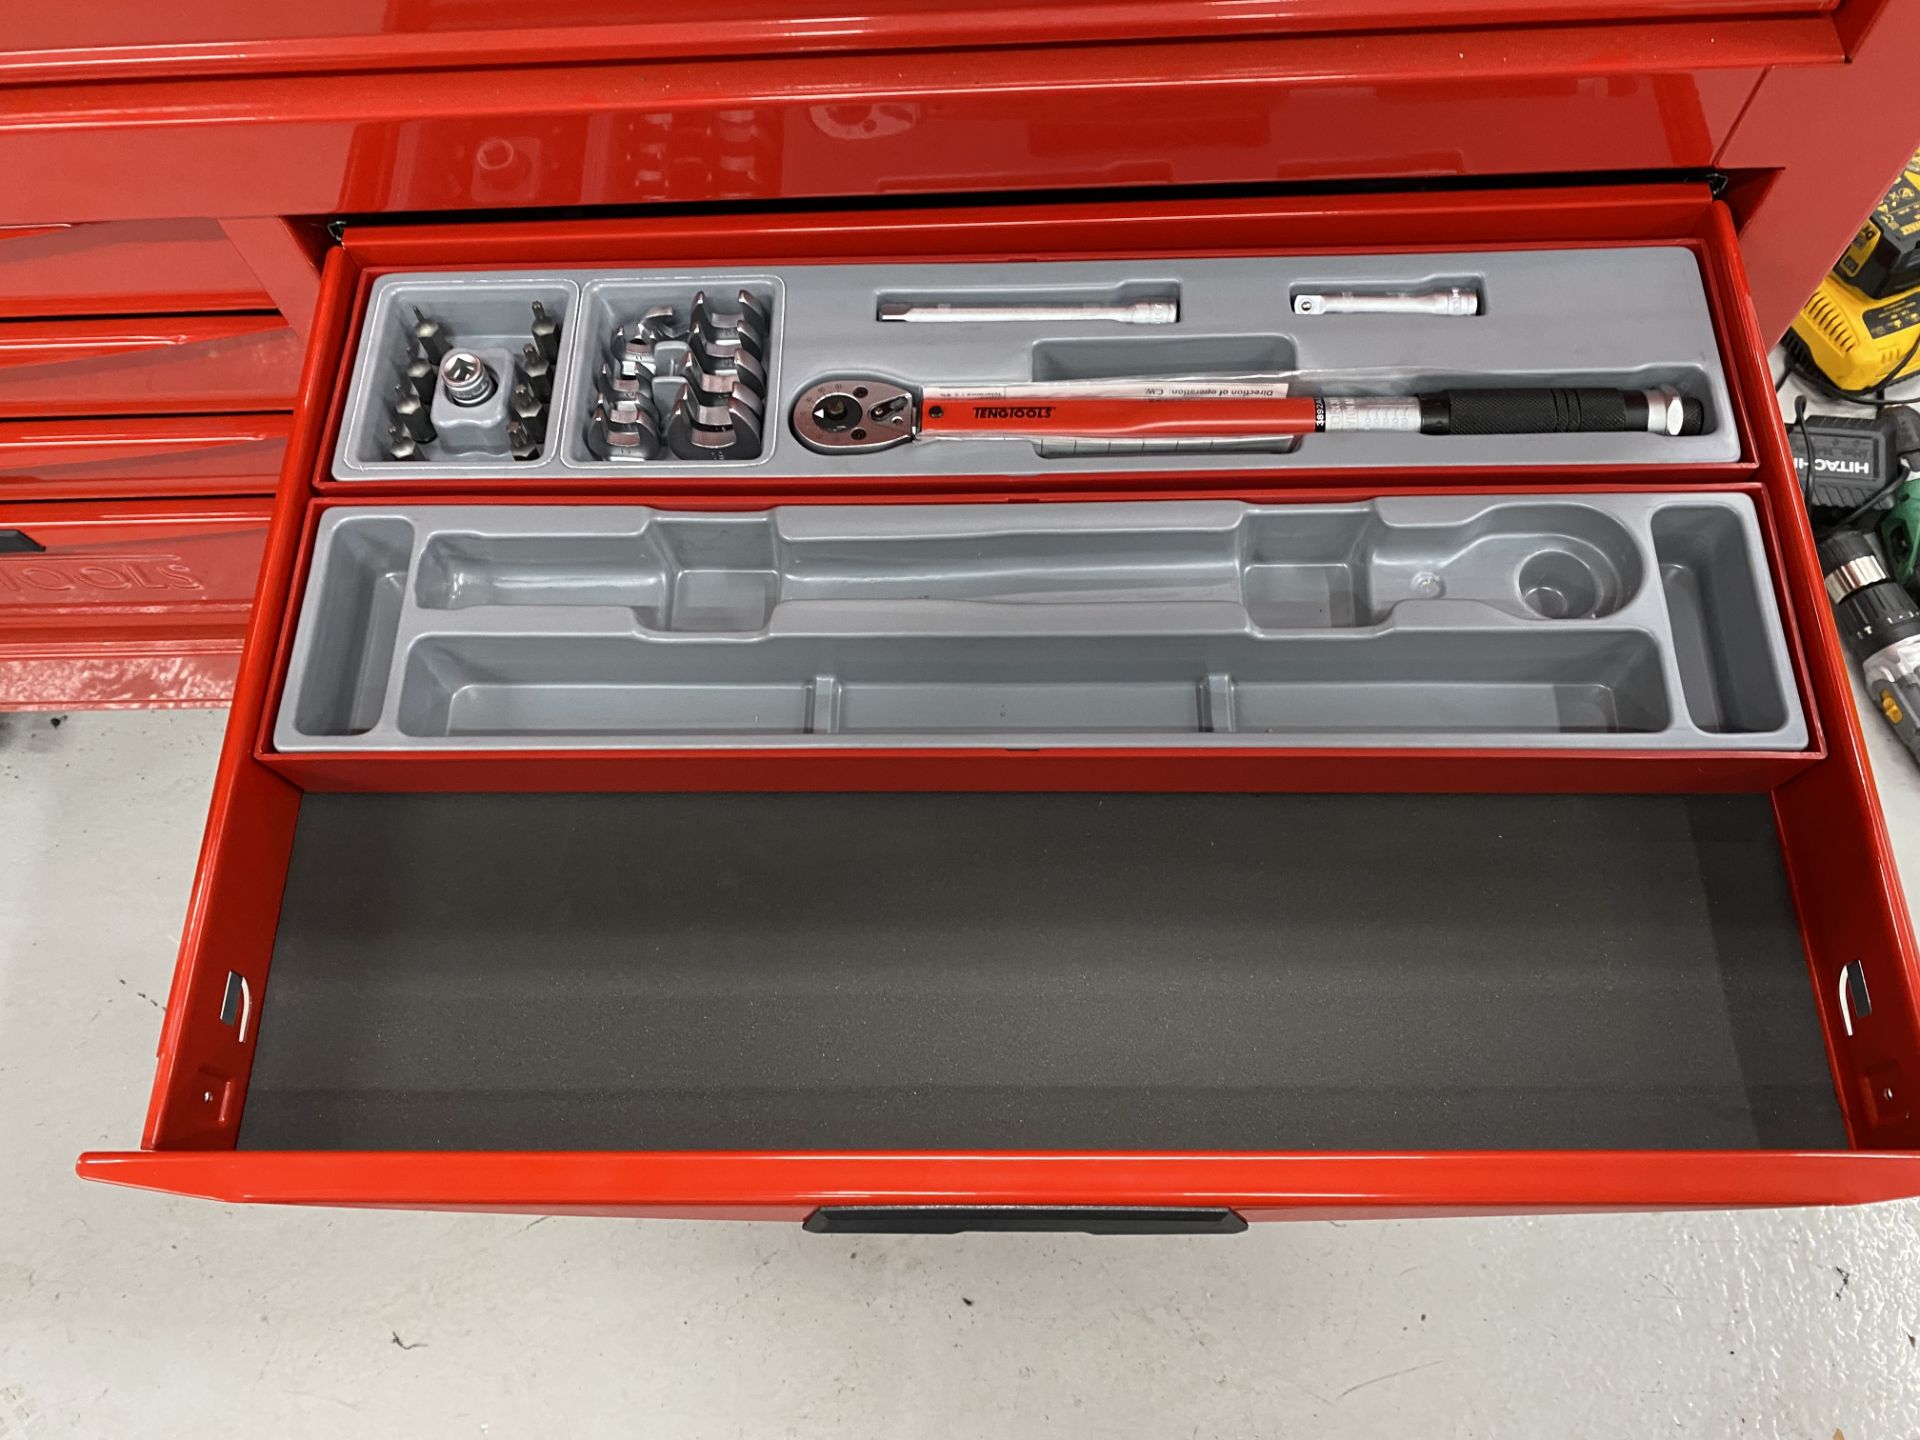 Tengtool box code CMONSTER-02, mobile 9 drawer toolbox with a 10 drawer top box toolbox, including - Image 15 of 21